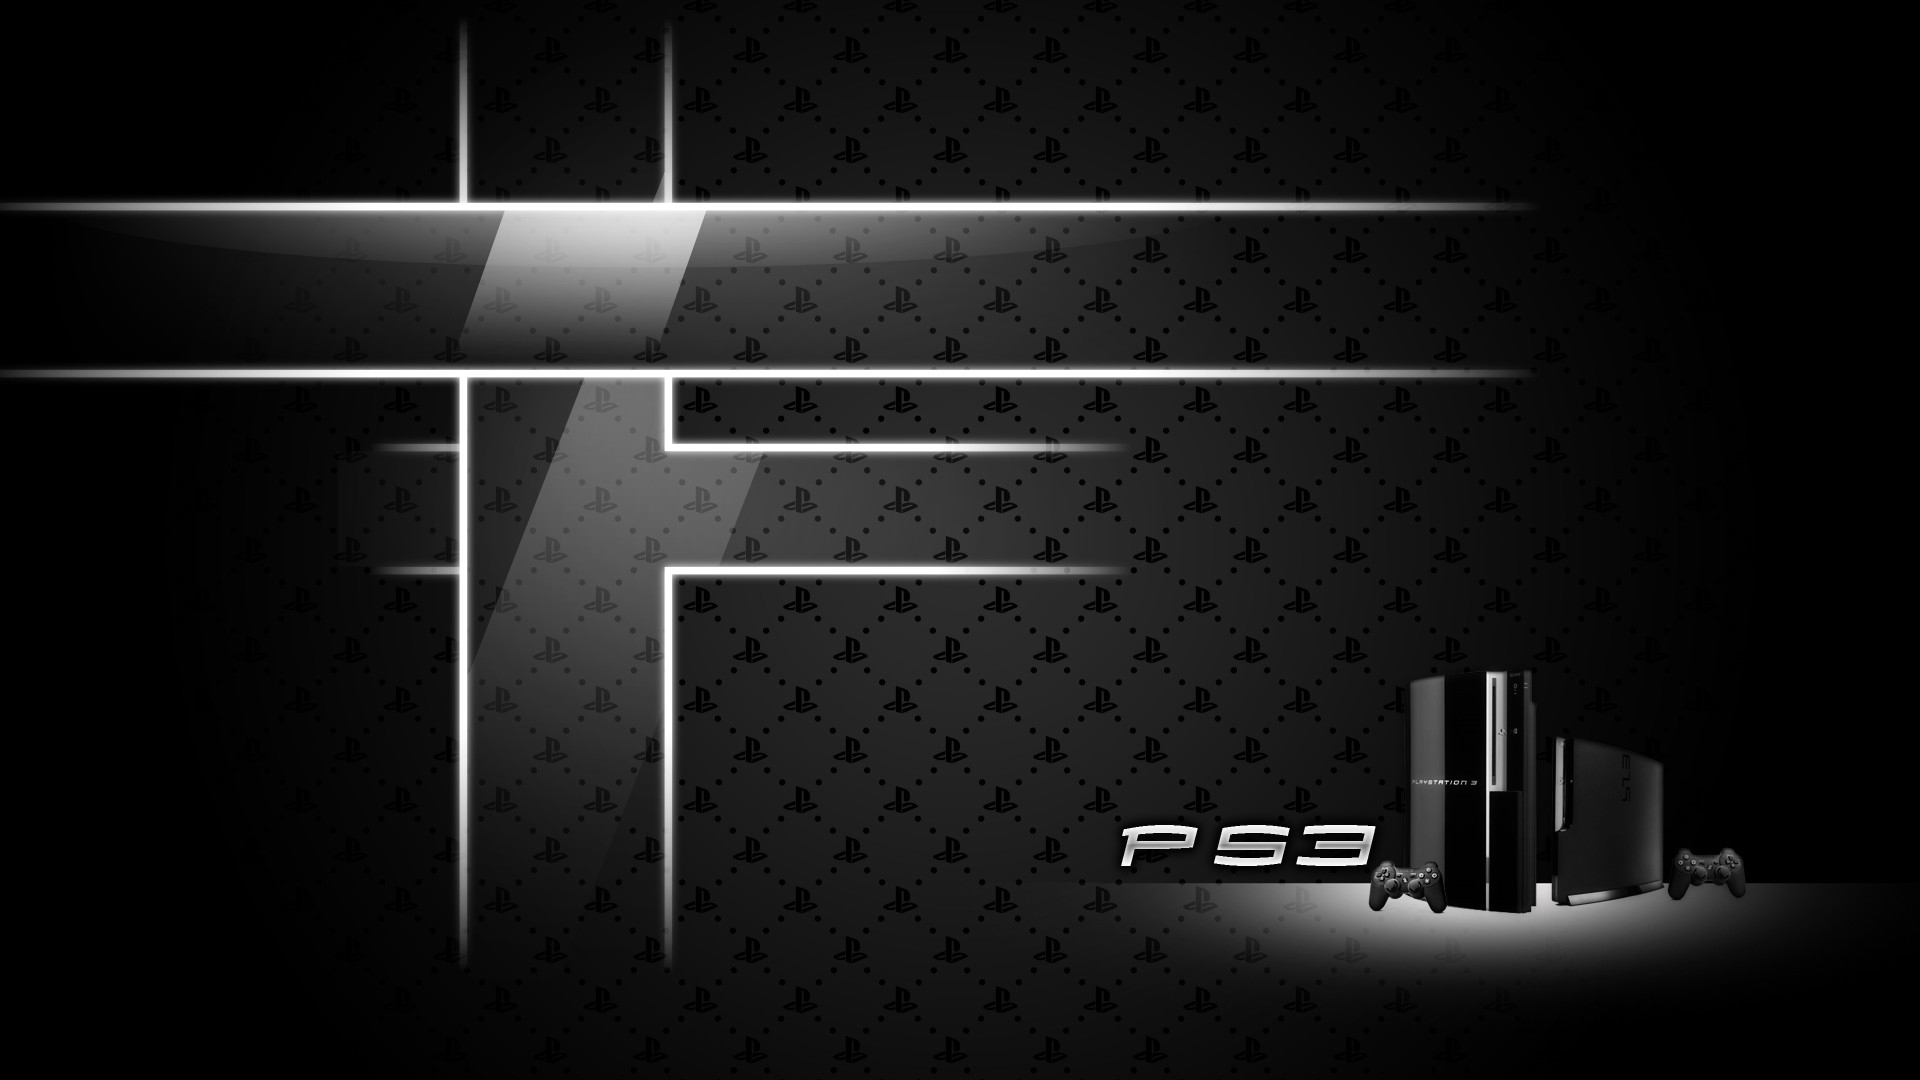 1920x1080 Title : 33+ ps3 wallpapercom. Dimension : 1920 x 1080. File Type :  JPG/JPEG. 10 Latest Ps3 Wallpapers And Themes ...